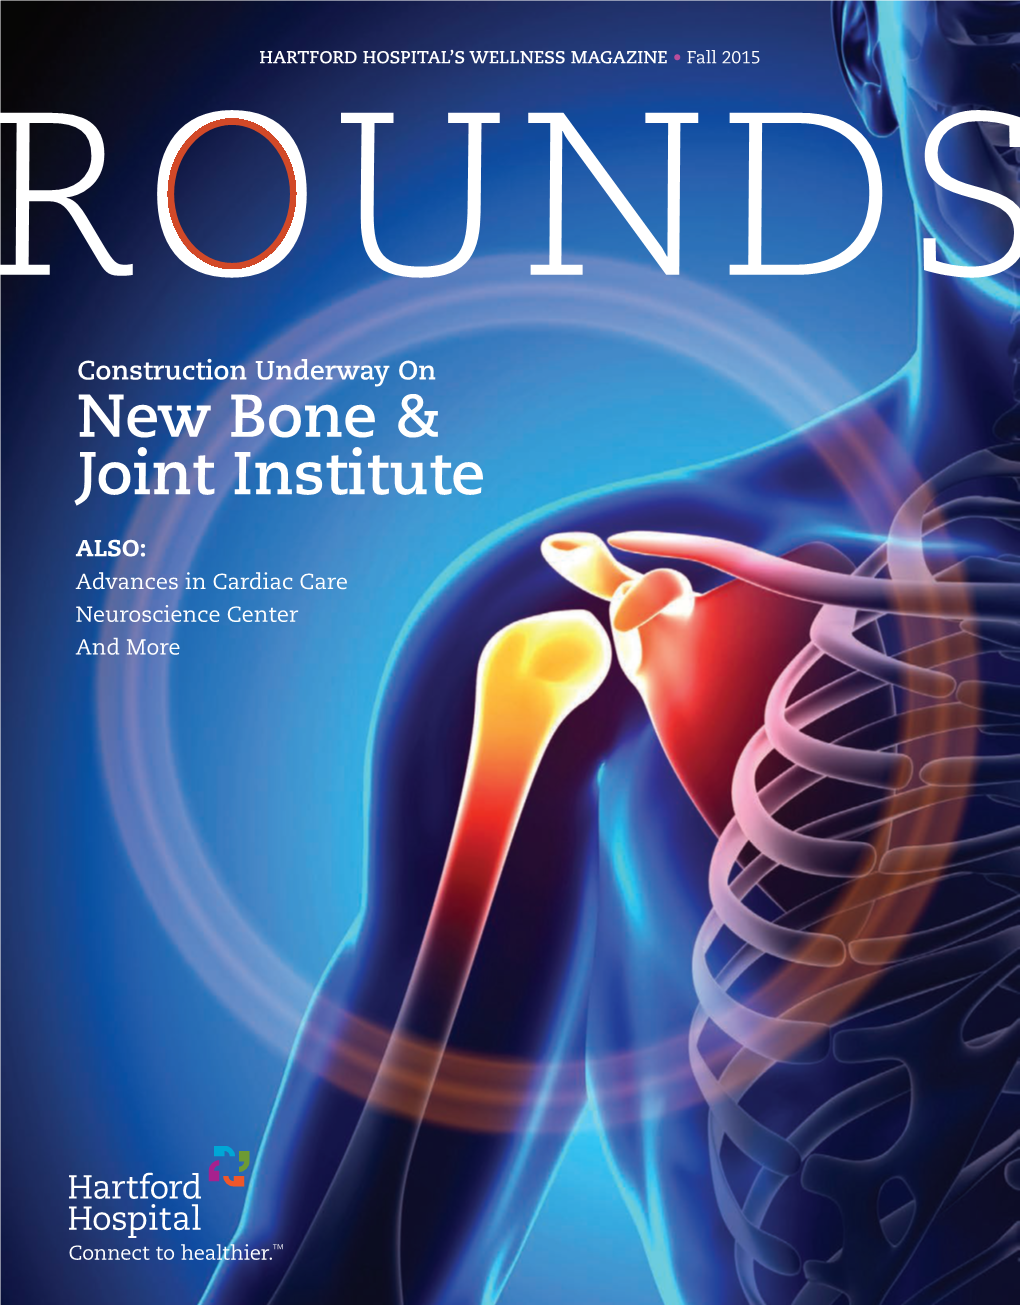 ROUNDS Construction Underway on New Bone & Joint Institute